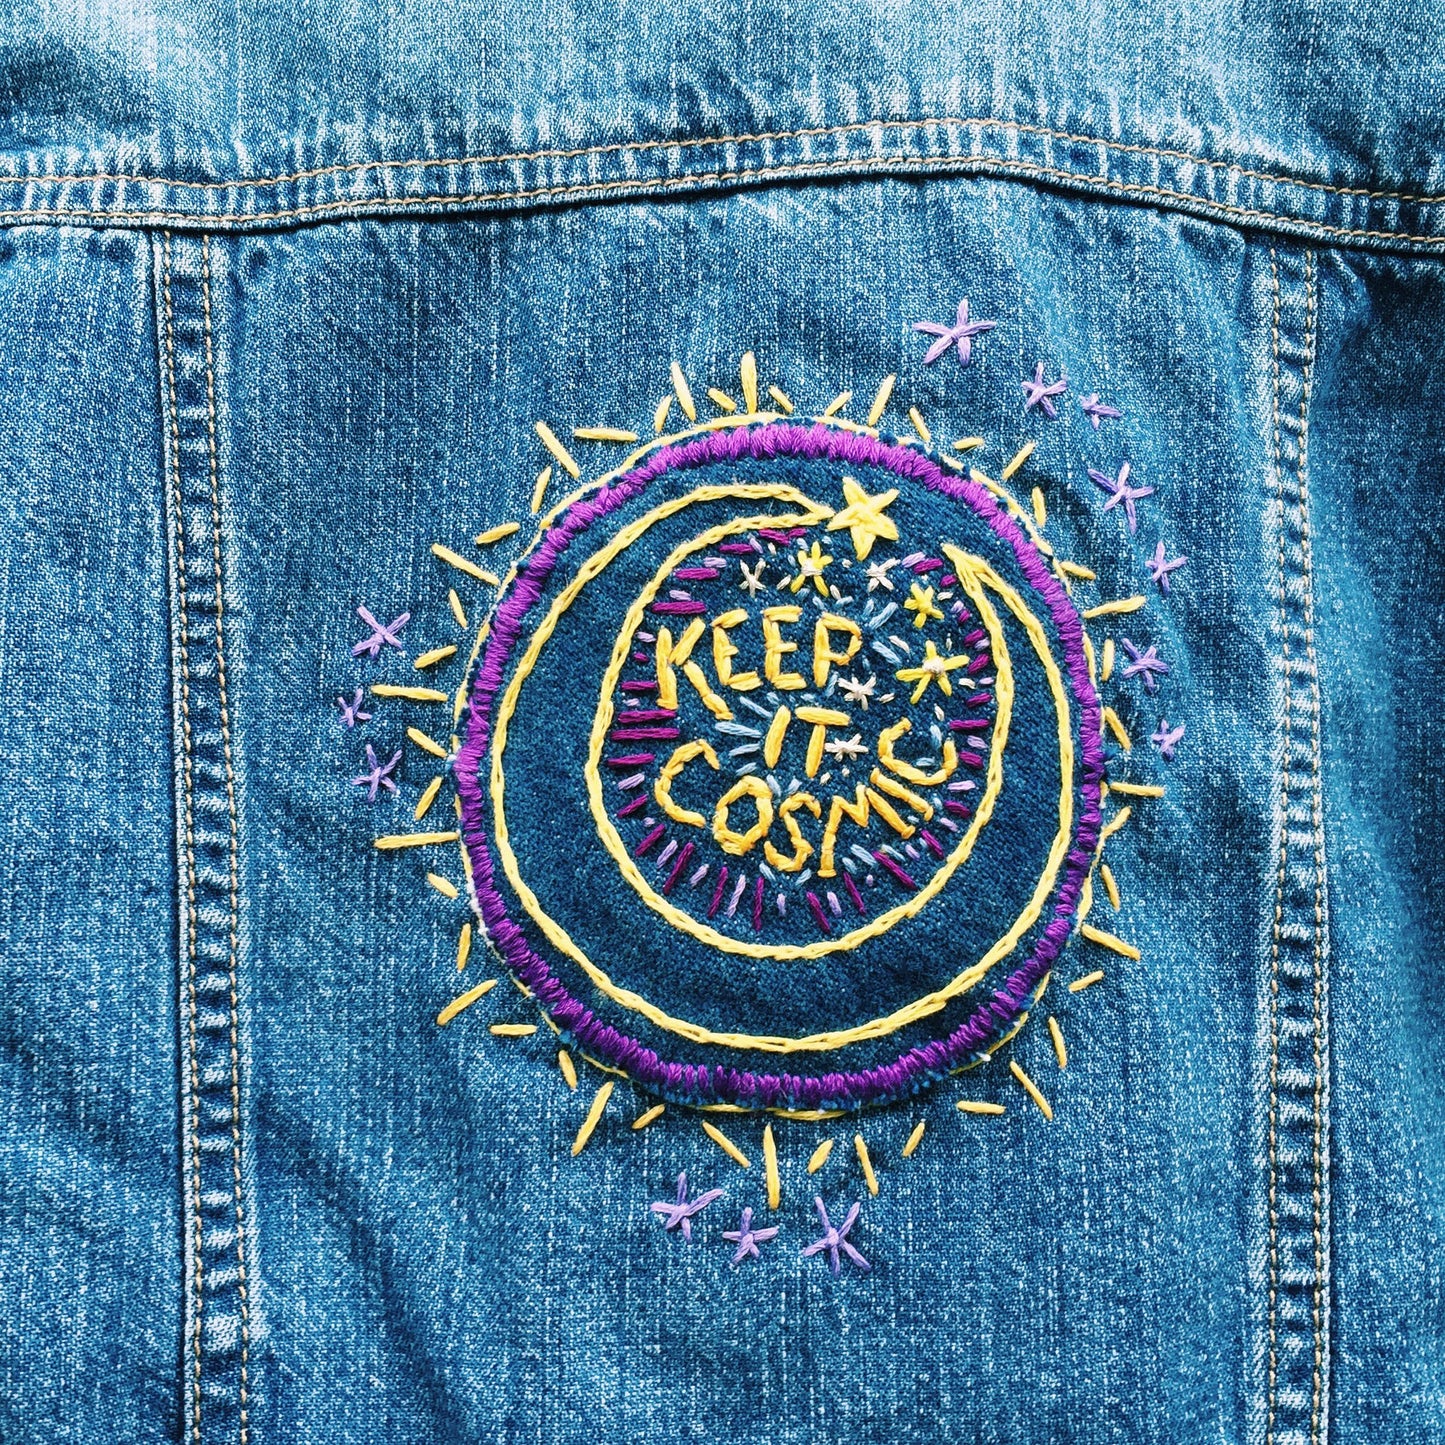 Keep It Cosmic Hand-Embroidered Denim Baby Jacket SALE